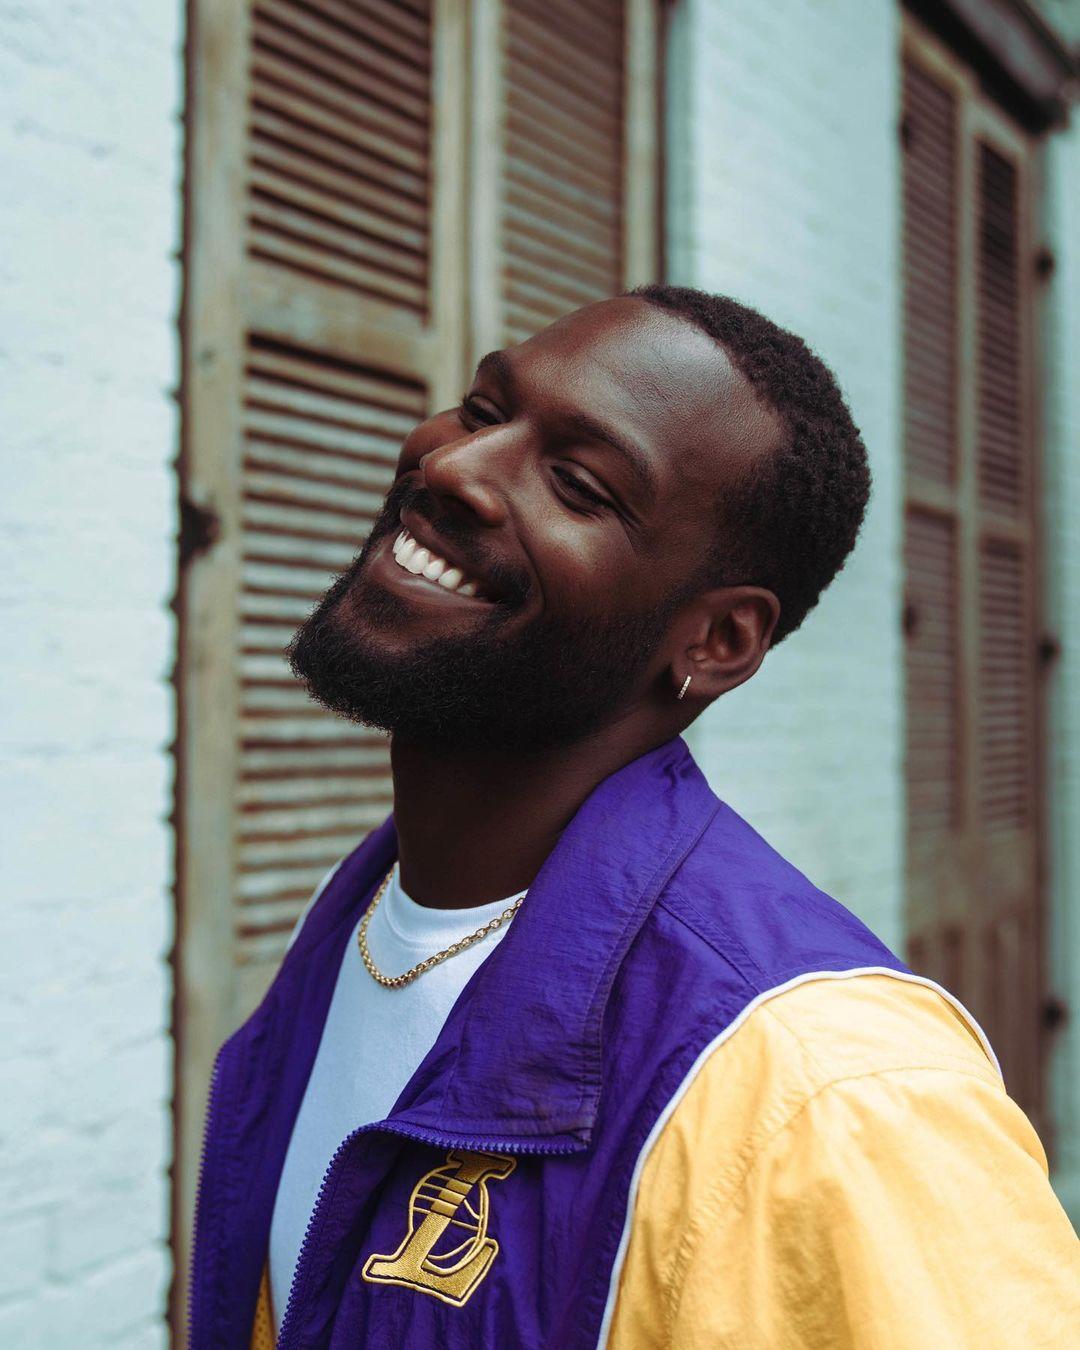 Kofi shows off a smile in this photo of him sporting a purple and yellow print sweater